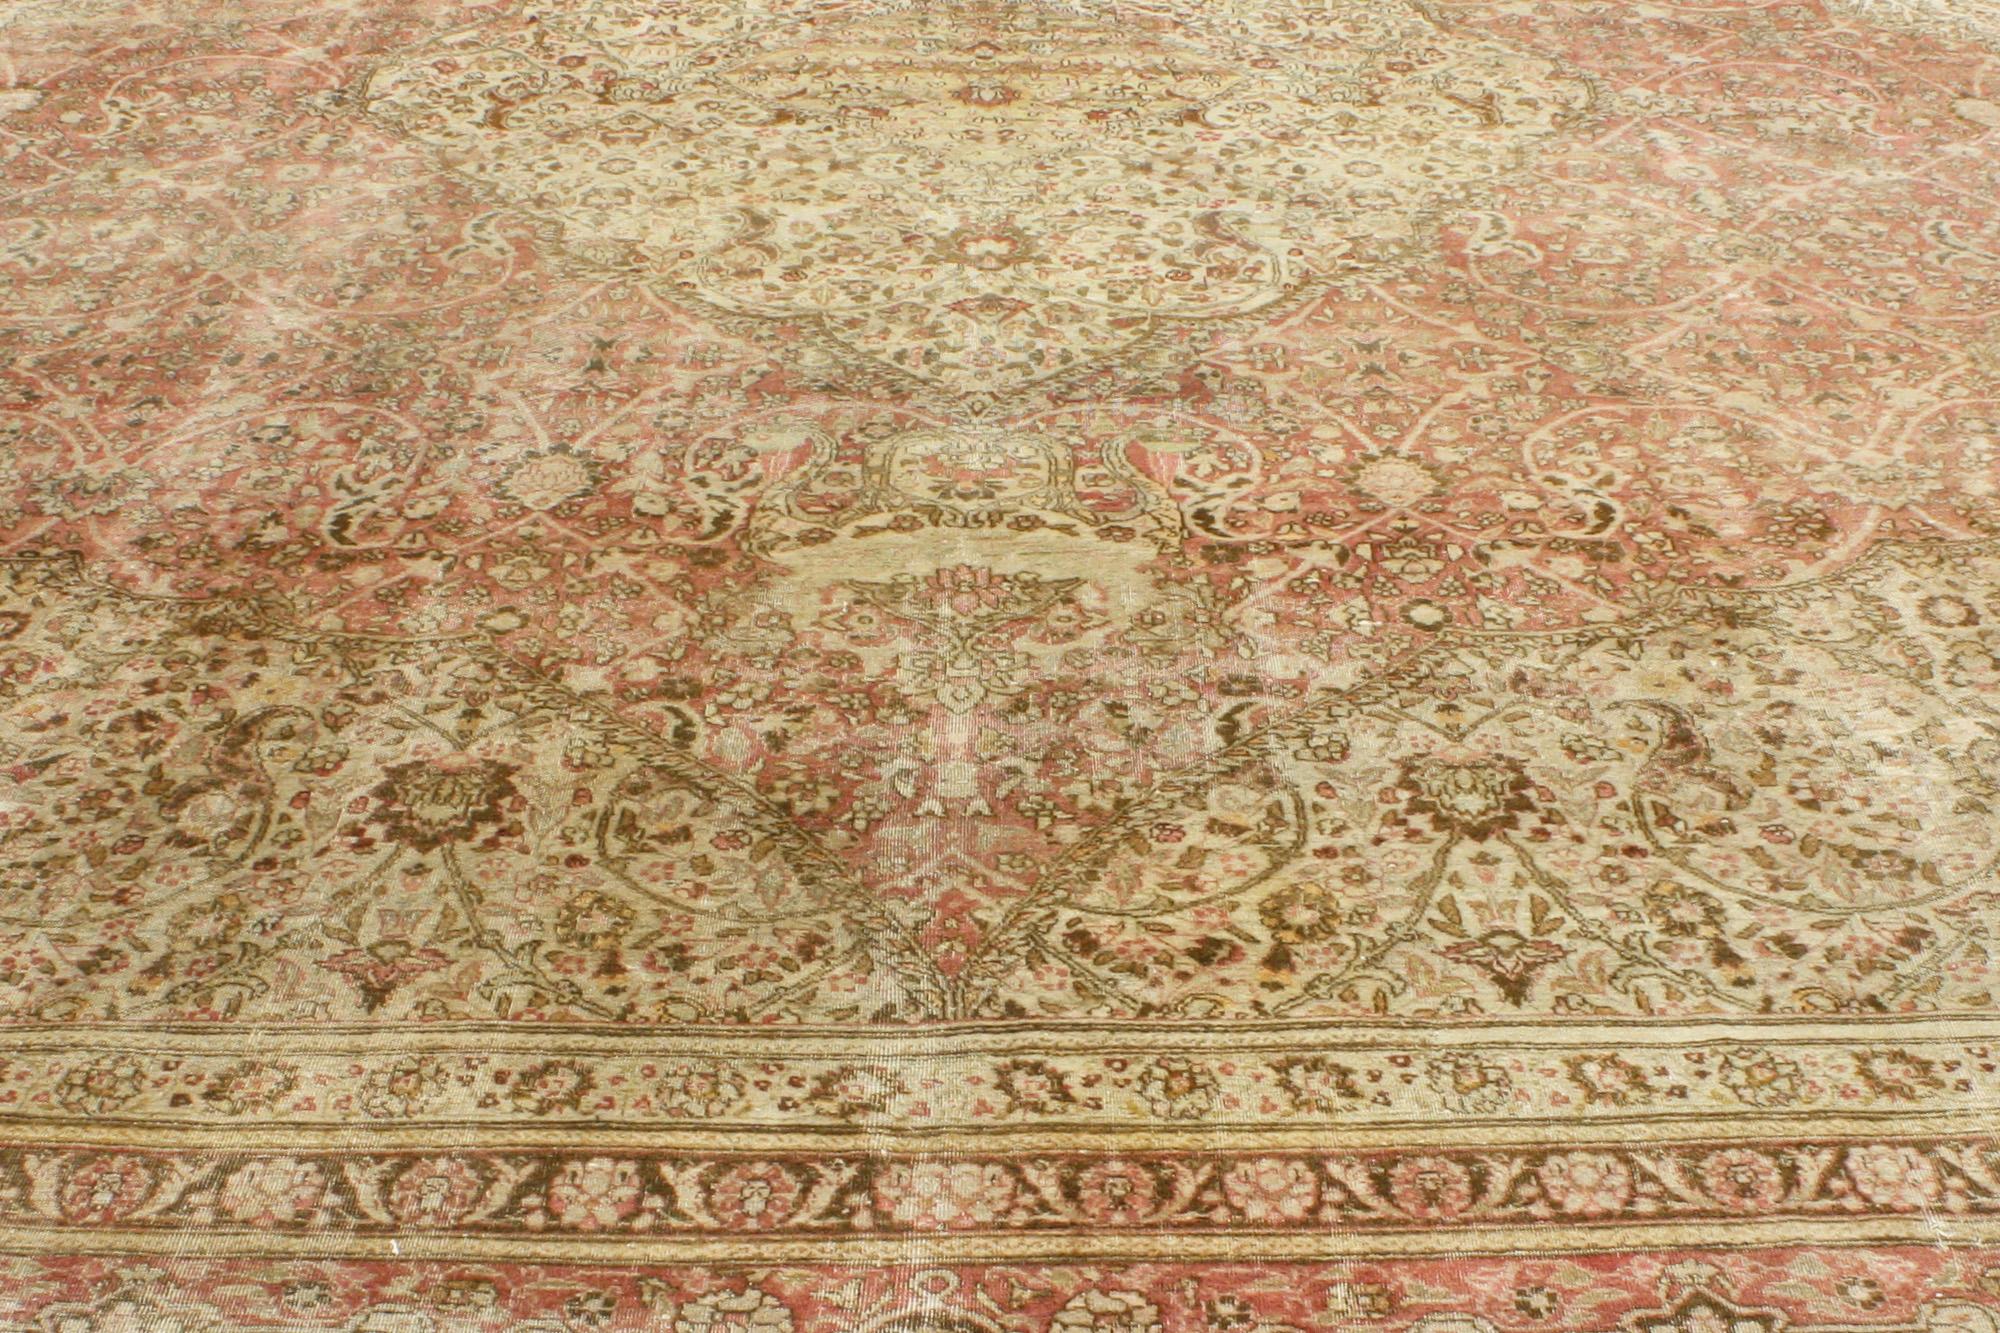 1880s Oversized Antique Persian Tabriz Rug Hotel Lobby Size Carpet In Distressed Condition For Sale In Dallas, TX